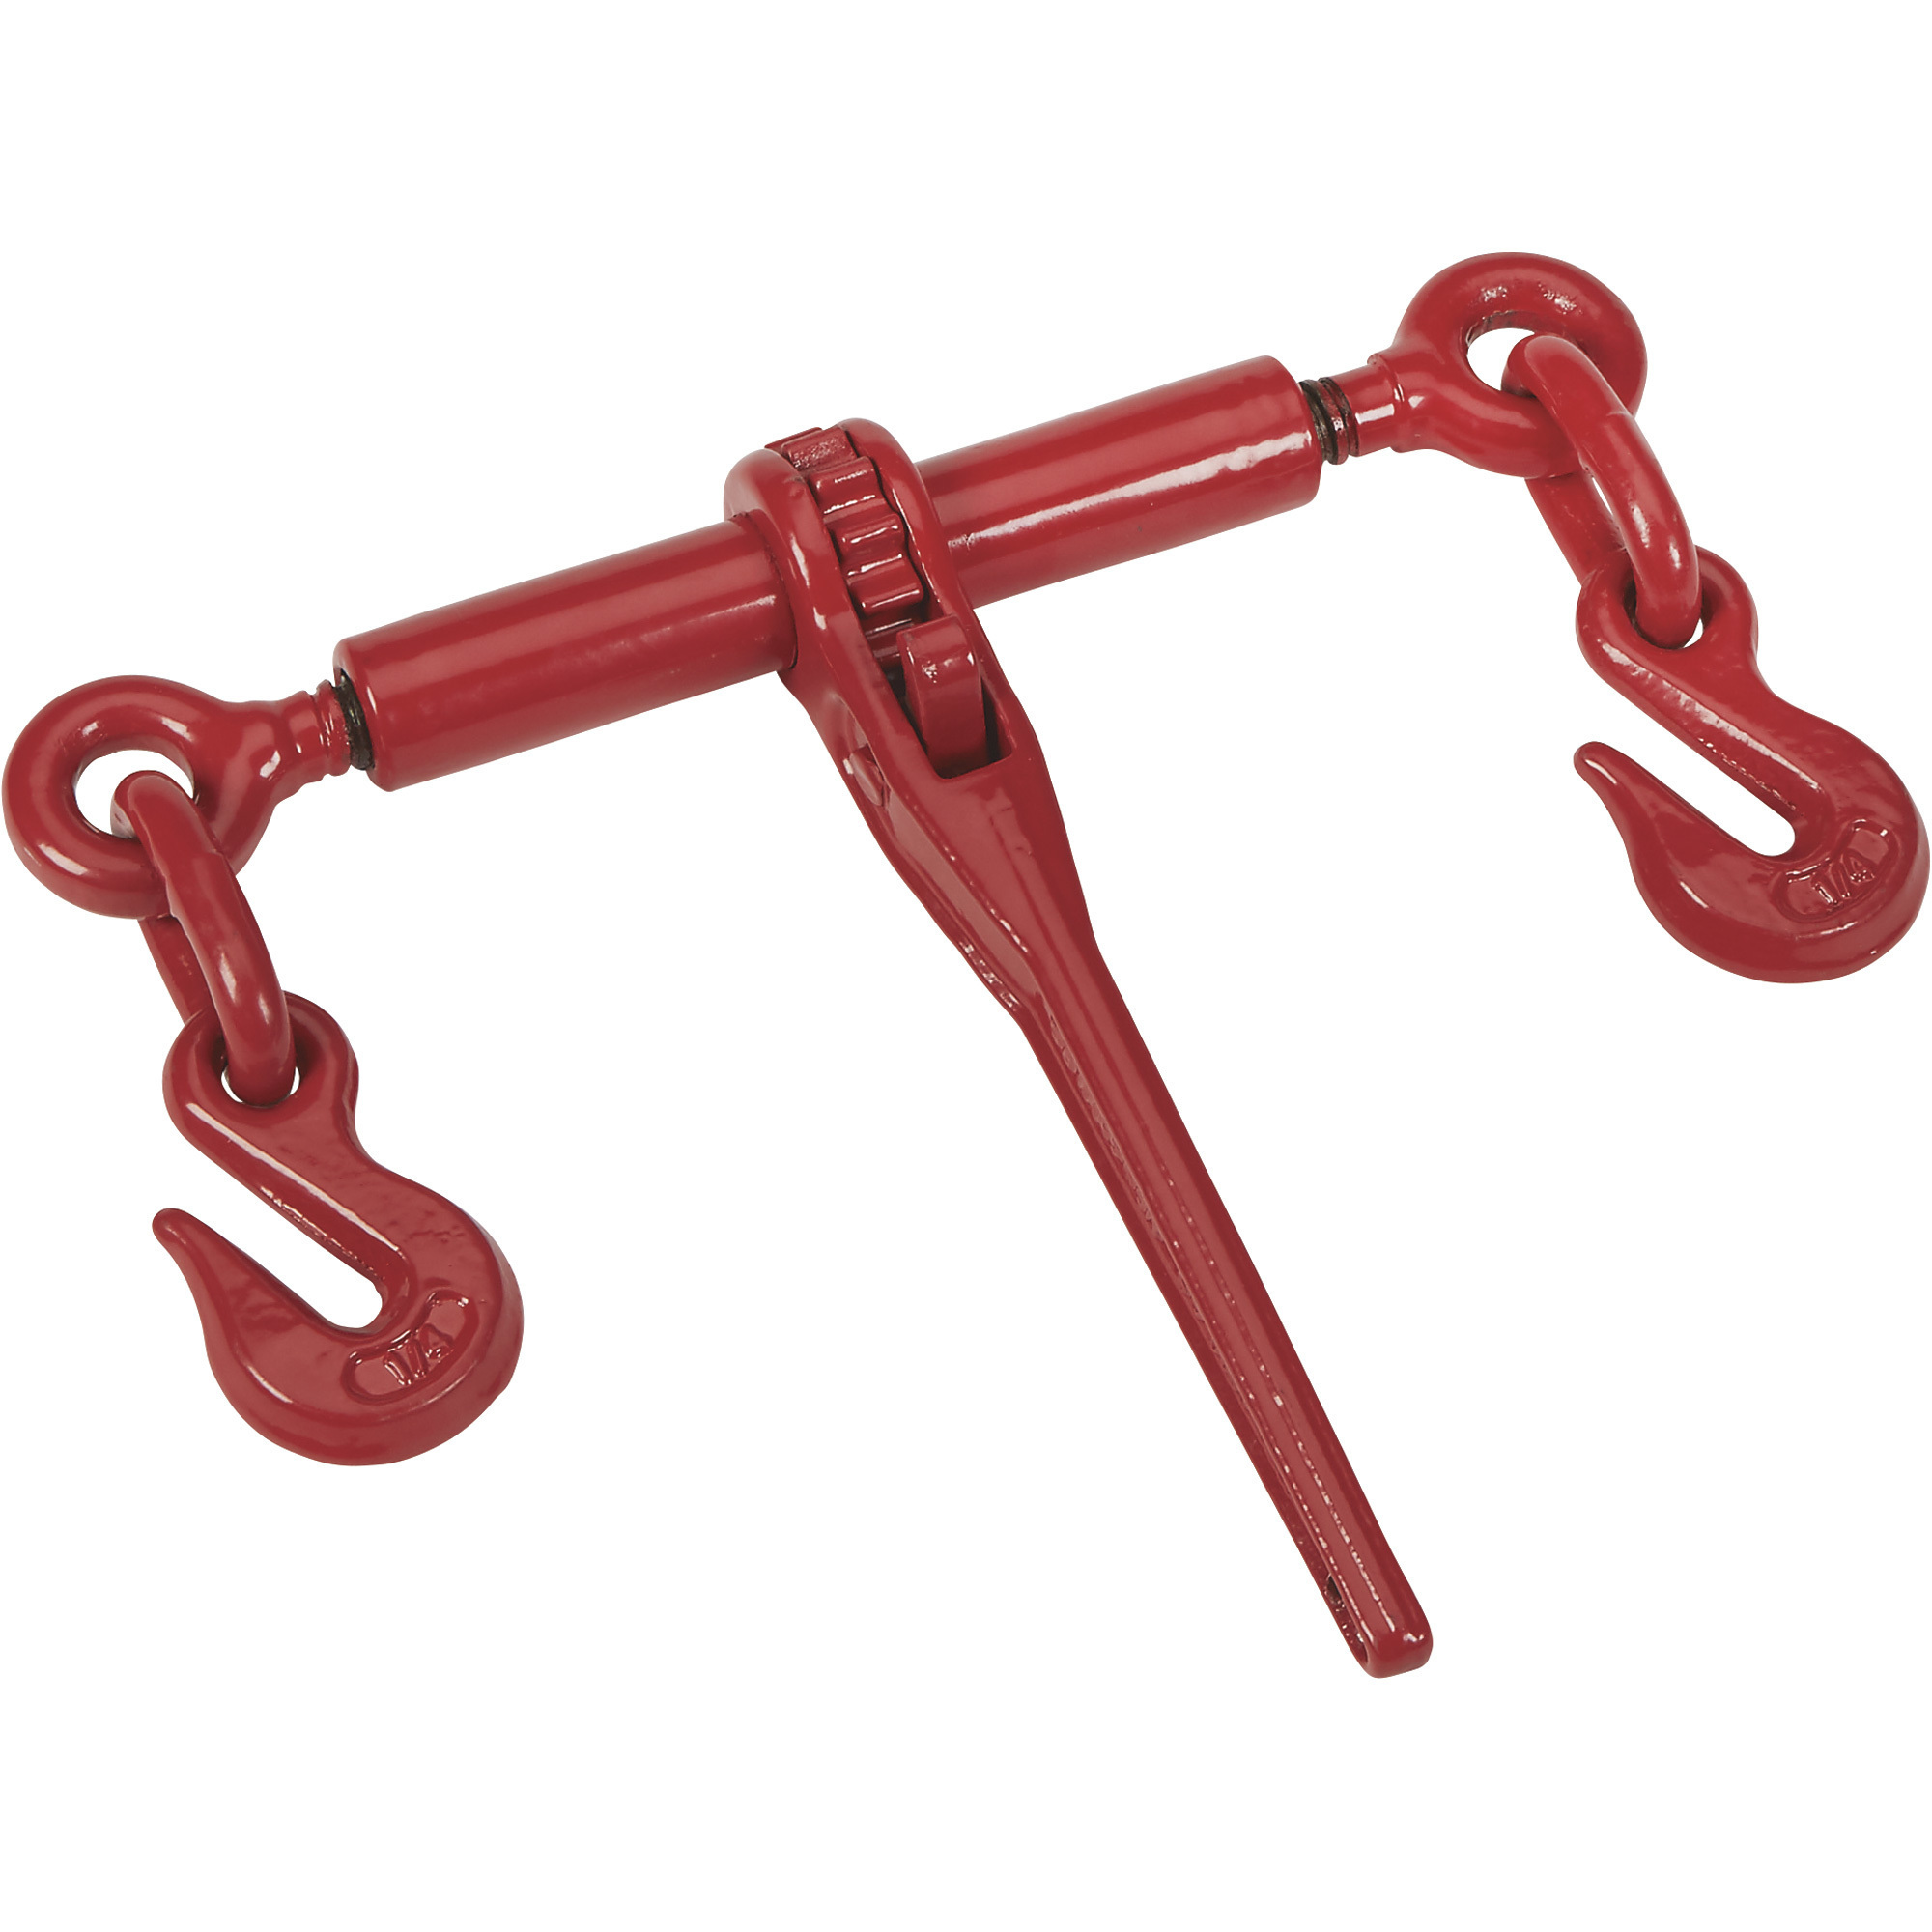 Ultra-Tow 1/4Inch Ratchet Chain Binder, 3900-Lb. Load Capacity